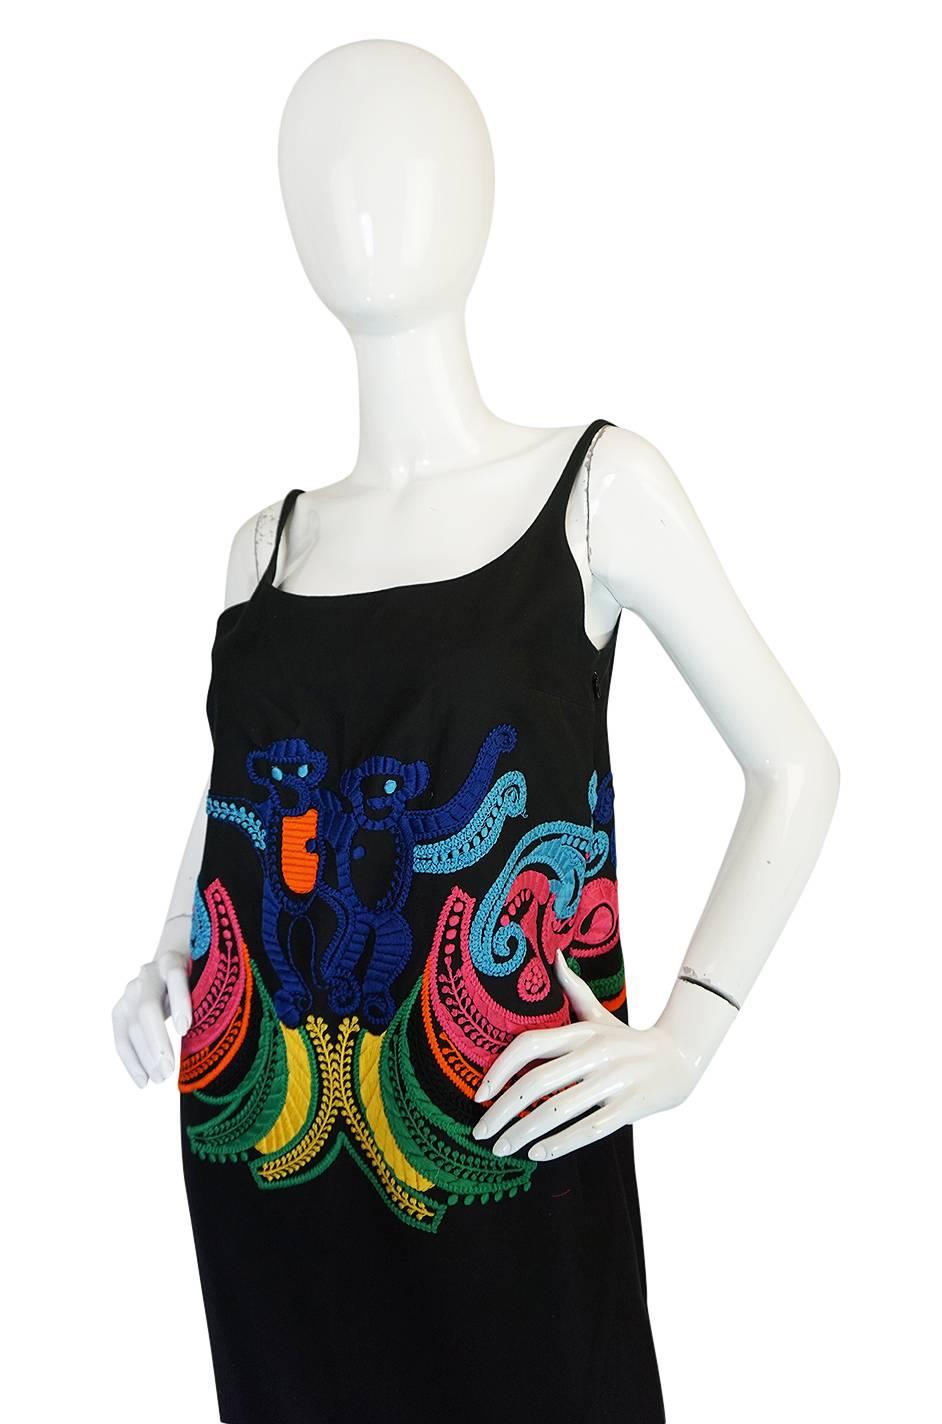 Look 29 S/S 2011 Prada Runway Embroidered Monkey Dress In Excellent Condition In Rockwood, ON